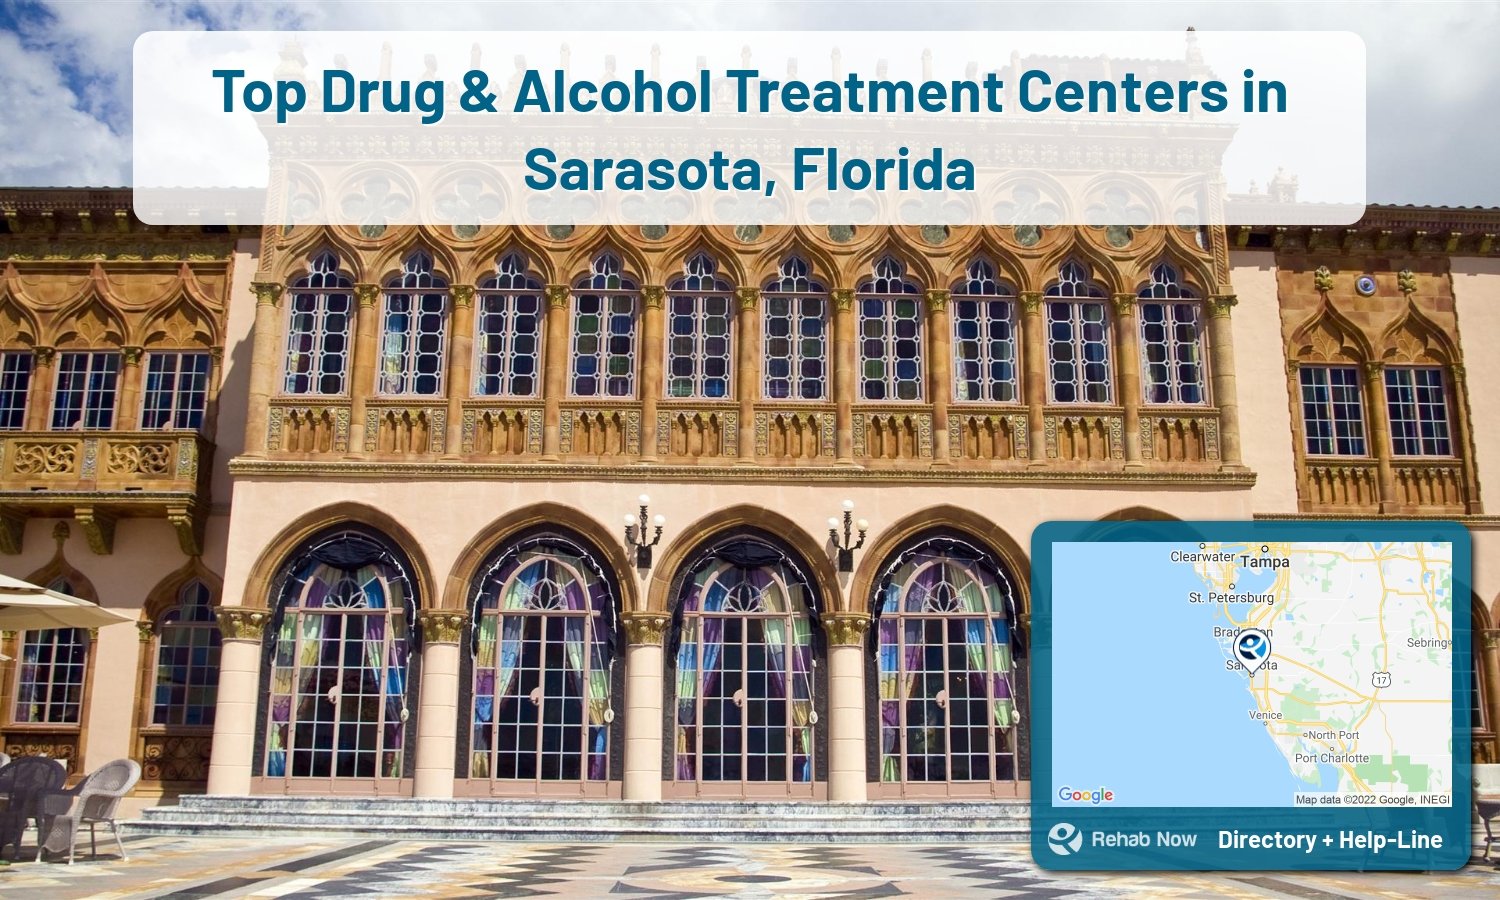 Ready to pick a rehab center in Sarasota? Get off alcohol, opiates, and other drugs, by selecting top drug rehab centers in Florida